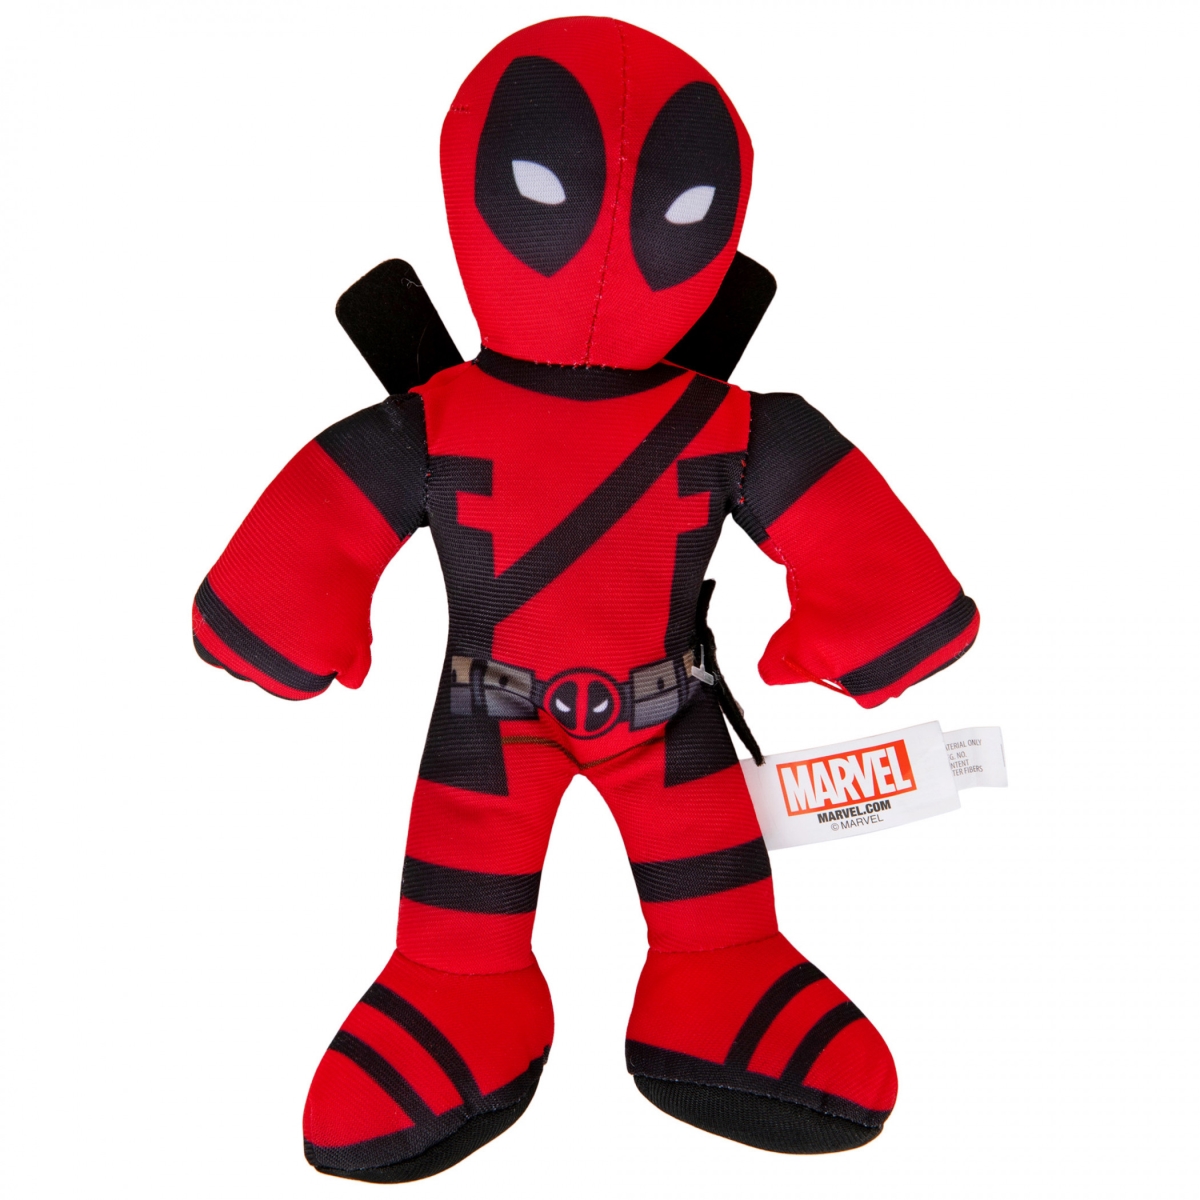 Picture of Deadpool 853684 9 in. Classic Suit Plush Doll, Red